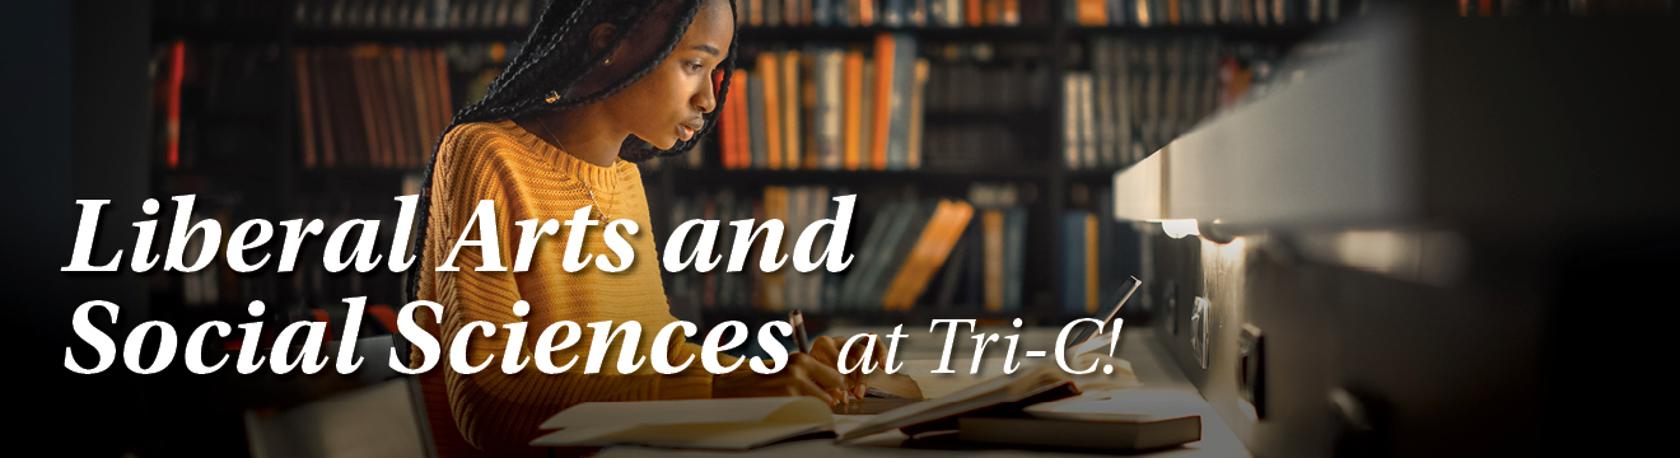 "Liberal Arts and Social Sciences at Tri-C!" with image of person in a library.